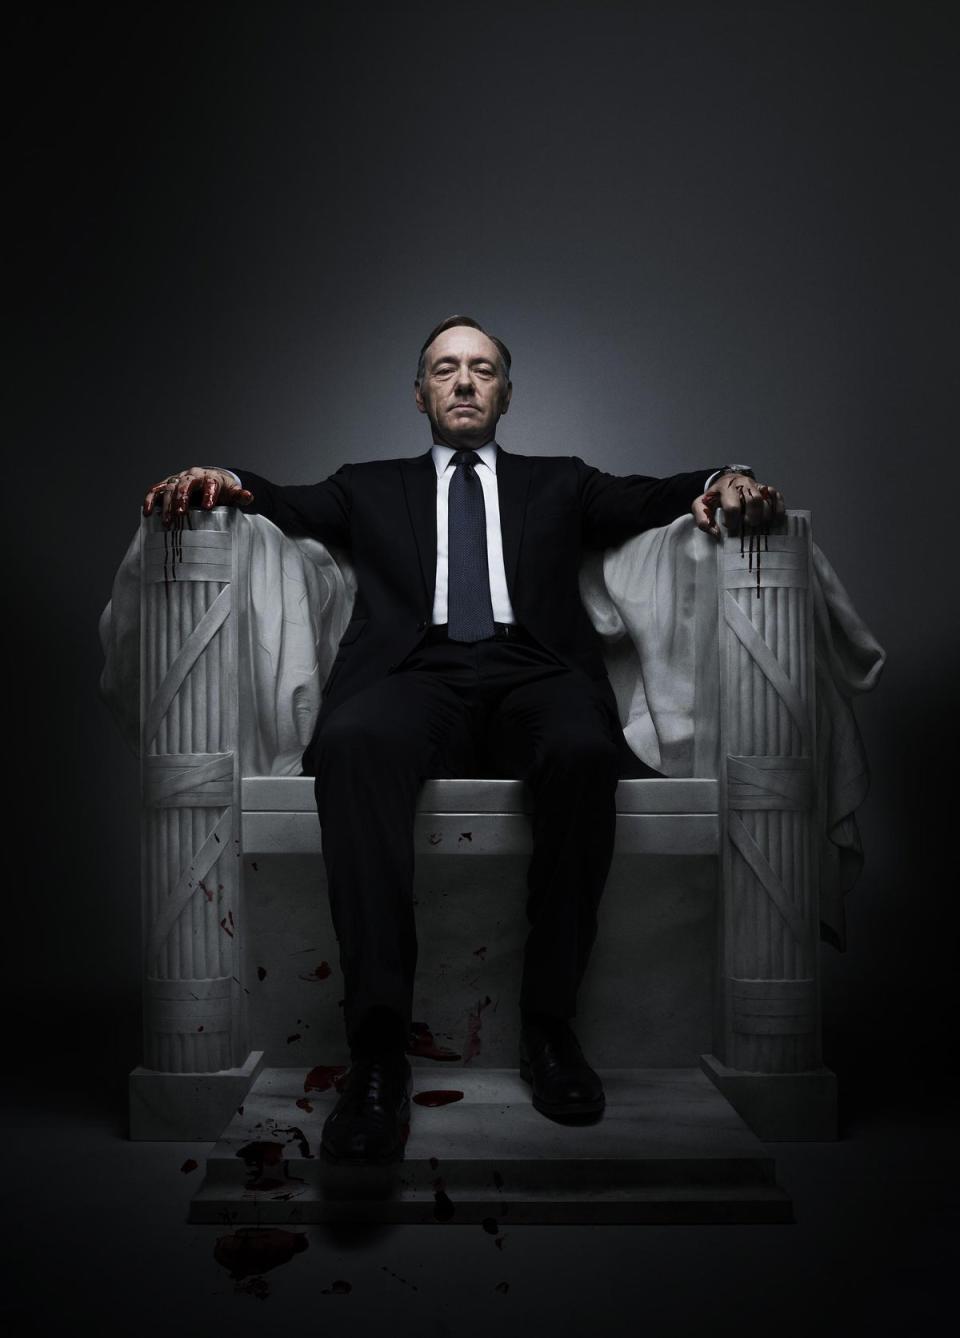 House of Cards debuts (2013): Kevin Spacey snaps a dog’s neck, Robin Wright waxes chilly in glorious trouser-suits. Yes, the first episode of David Fincher’s Netflix thriller had its moments. But House of Cards was far bigger than itself. It was the mega-bucks franchise with which Netflix revealed to the world the sweep of its ambitions. Oceans of content would follow – from retro romp Stranger Things to the (since cancelled) Marvel adaptations, including Dare-Devil and Jessica Jones, and royal rumpus The Crown. The way we watched TV would never be the same again. (Sky)